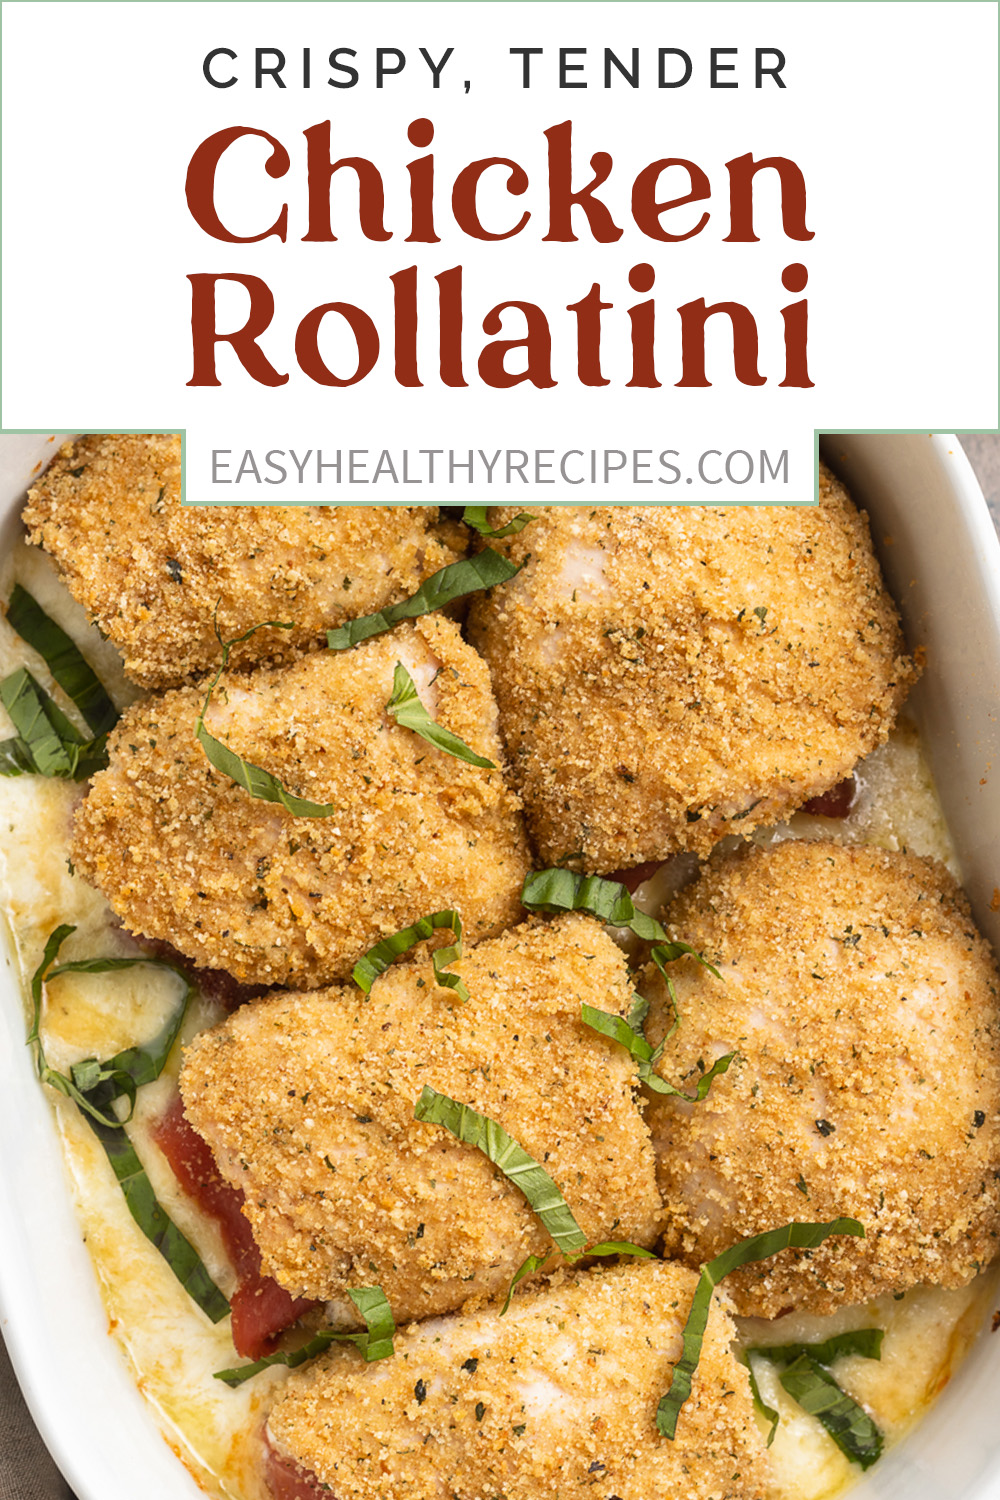 Pin graphic for chicken rollatini.